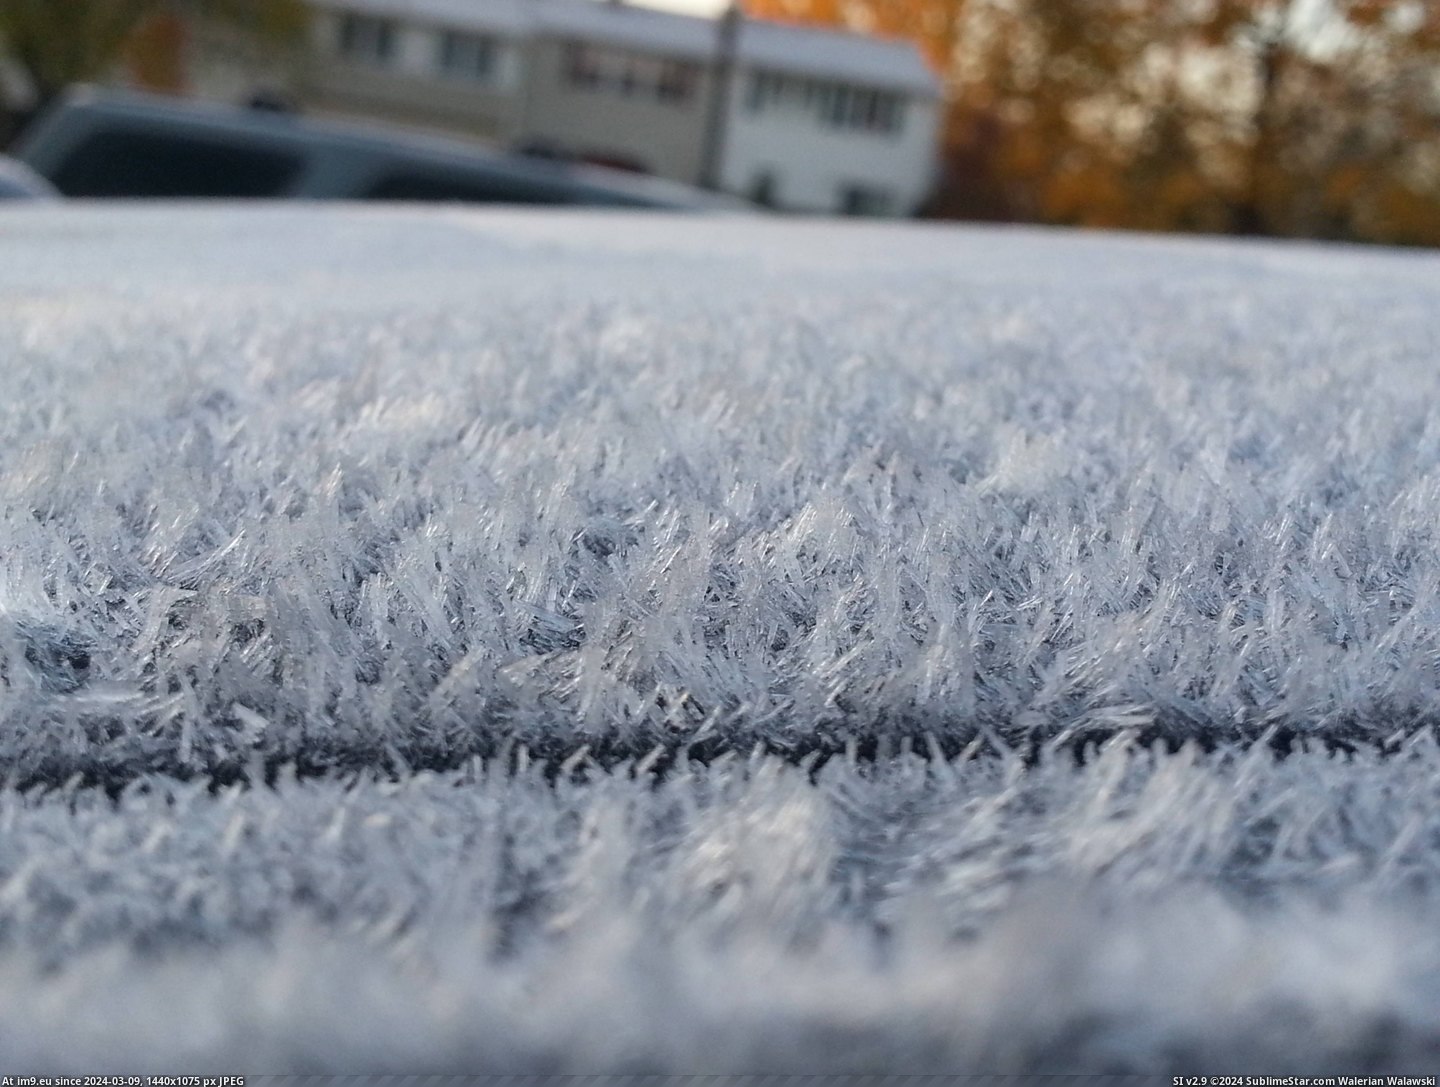 #Morning #Frost #Car [Pics] The frost on my car this morning Pic. (Image of album My r/PICS favs))